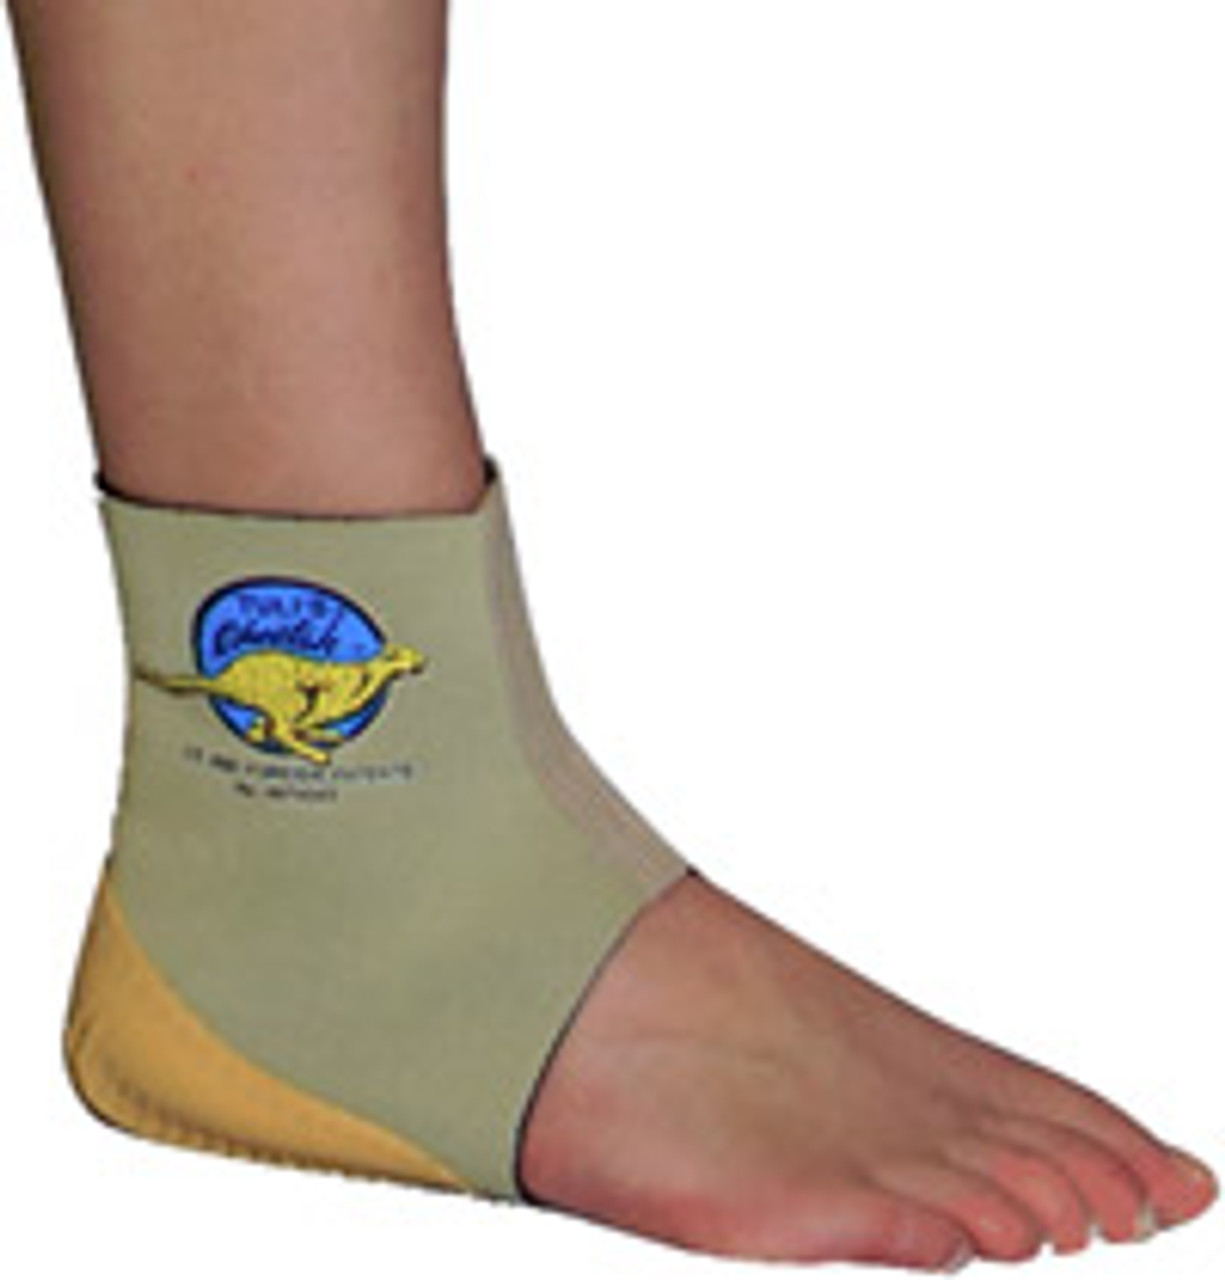 Cheetah Ankle Support Large (M10240) (M10240)